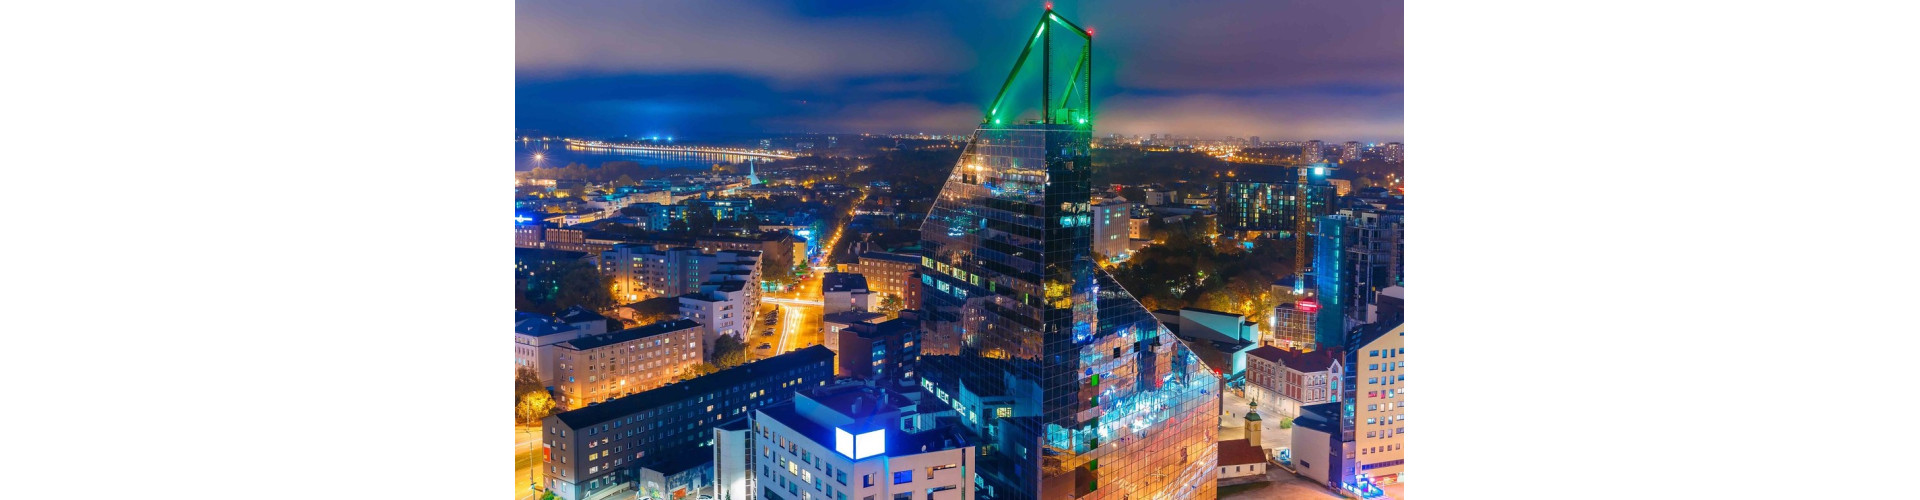 6 Important Technology Startups That Came Up from Estonia